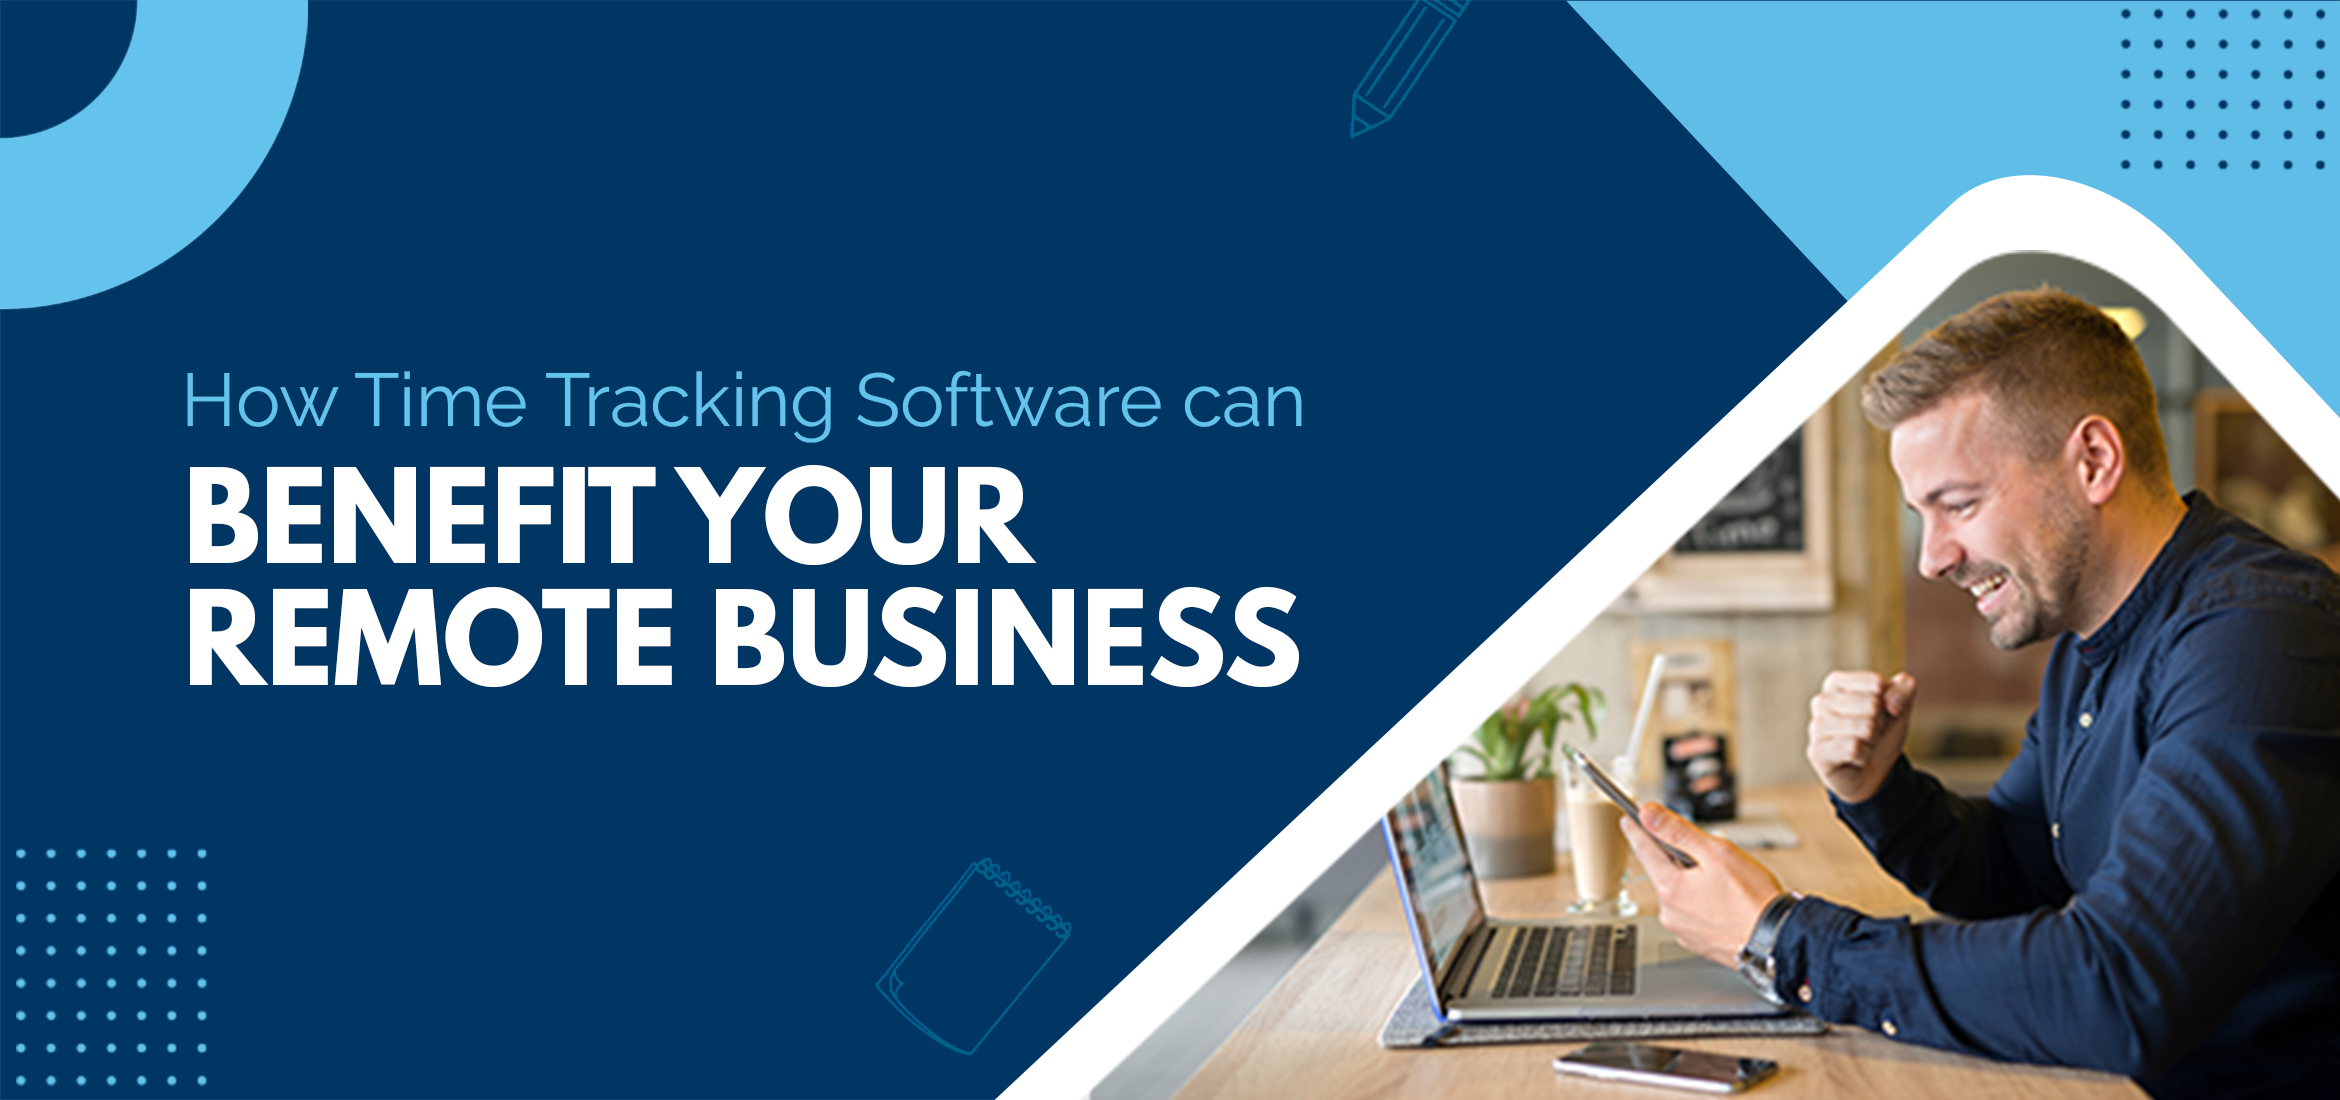 How Time Tracking Software can Benefit Your Remote Business